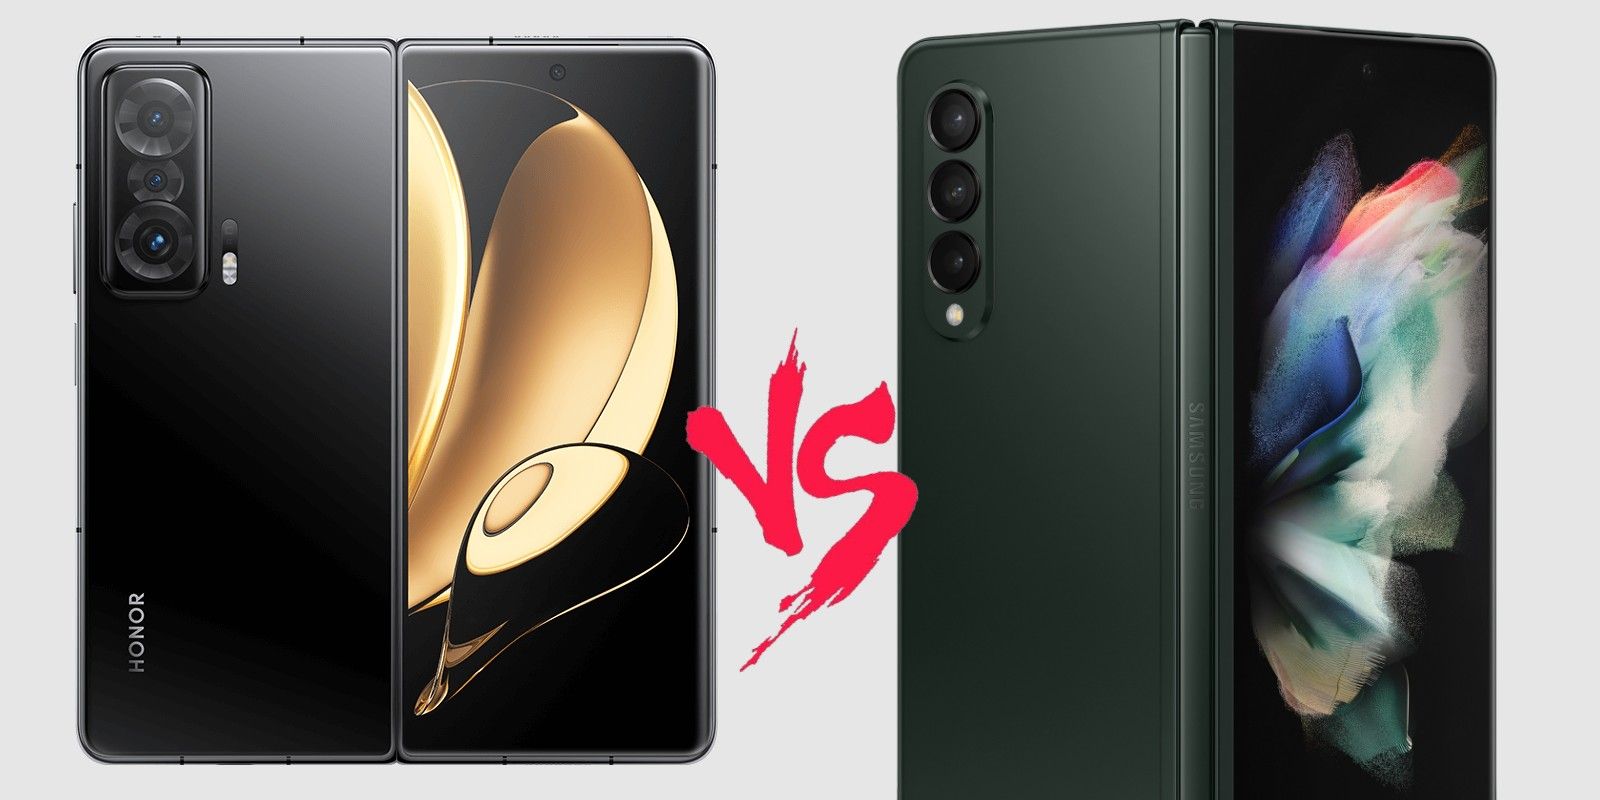 The Honor Magic V challenges the Galaxy Z Fold 3 for the foldable smartphone crown